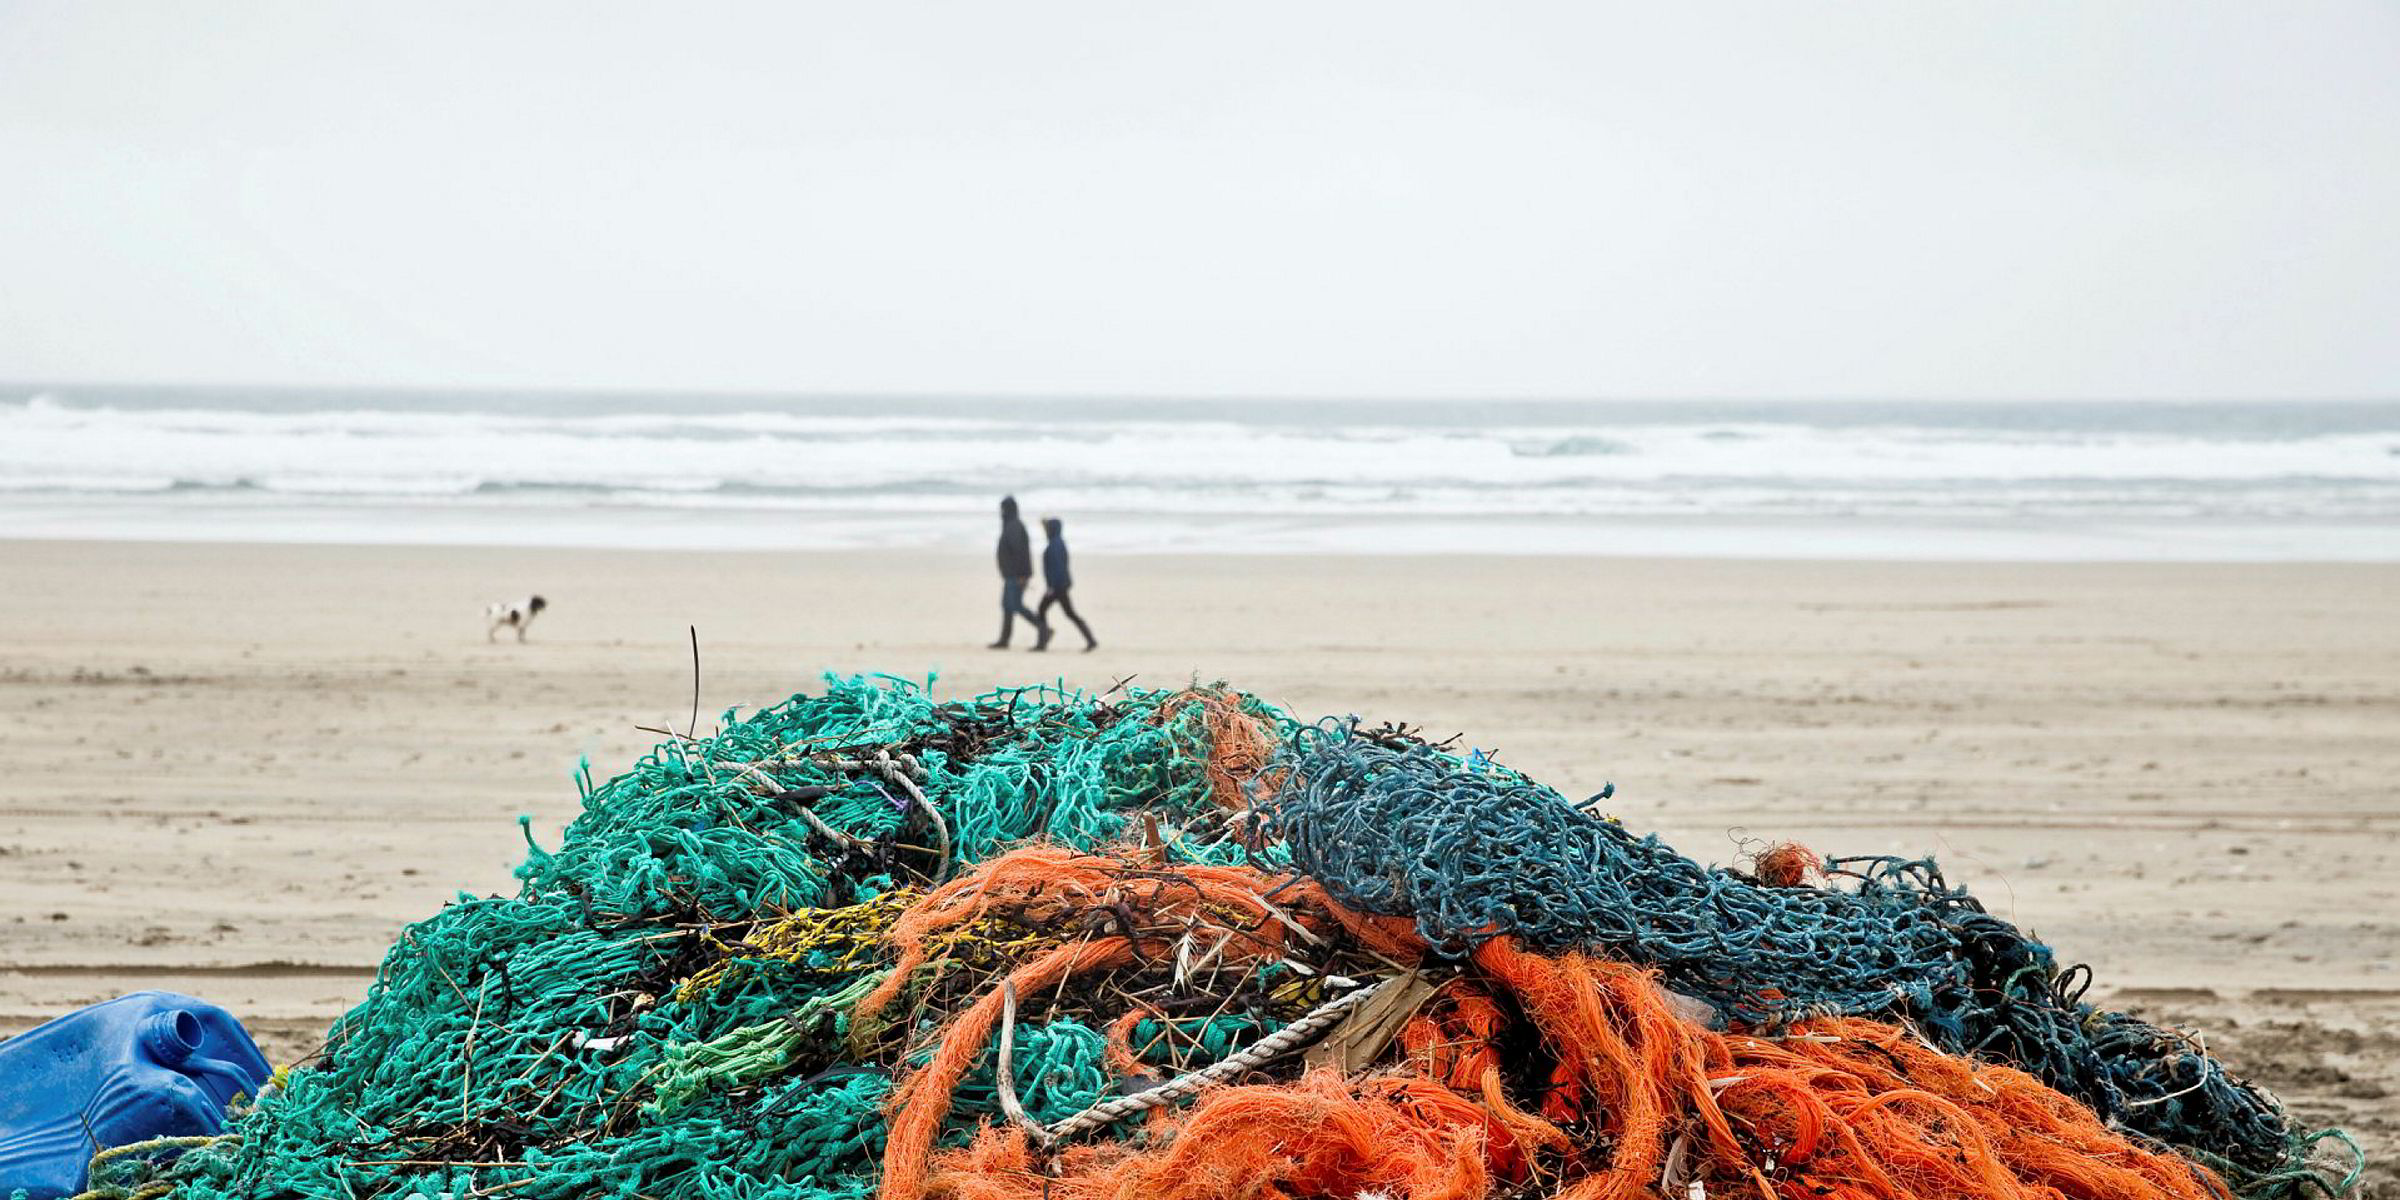 Waitrose and M&S sign up to the fight on ghost gear